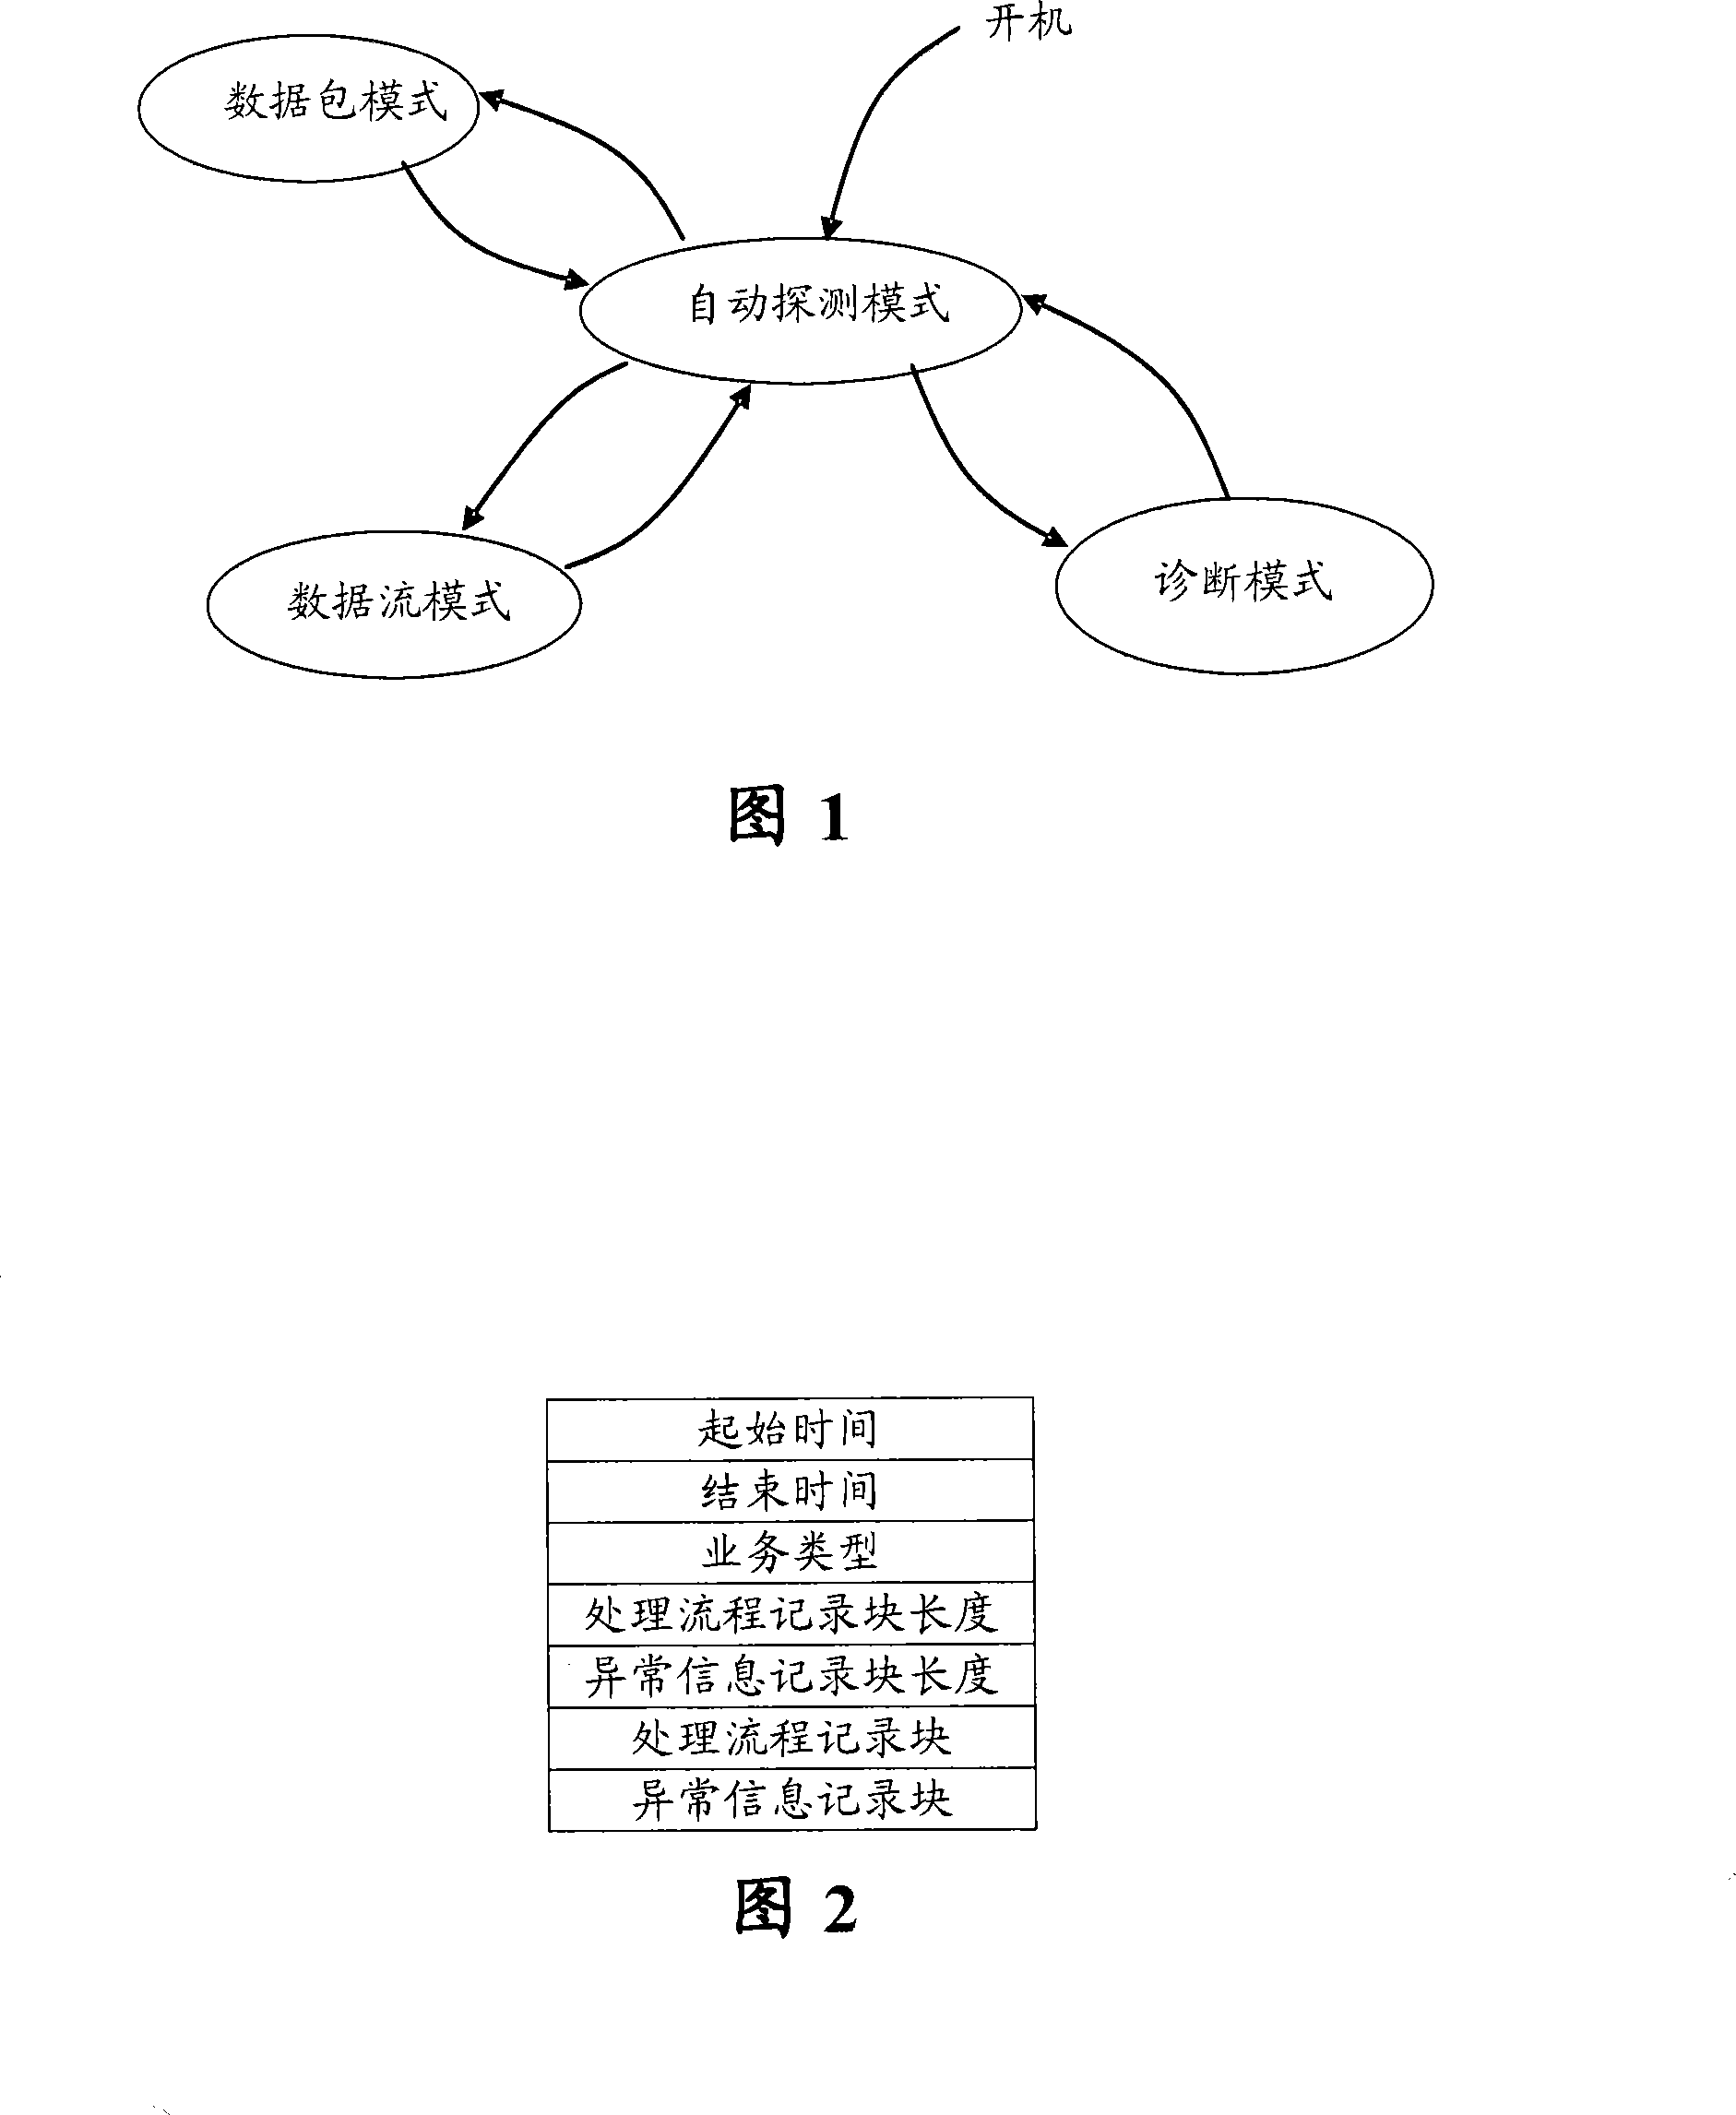 A mobile communication terminal and fault diagnosis method